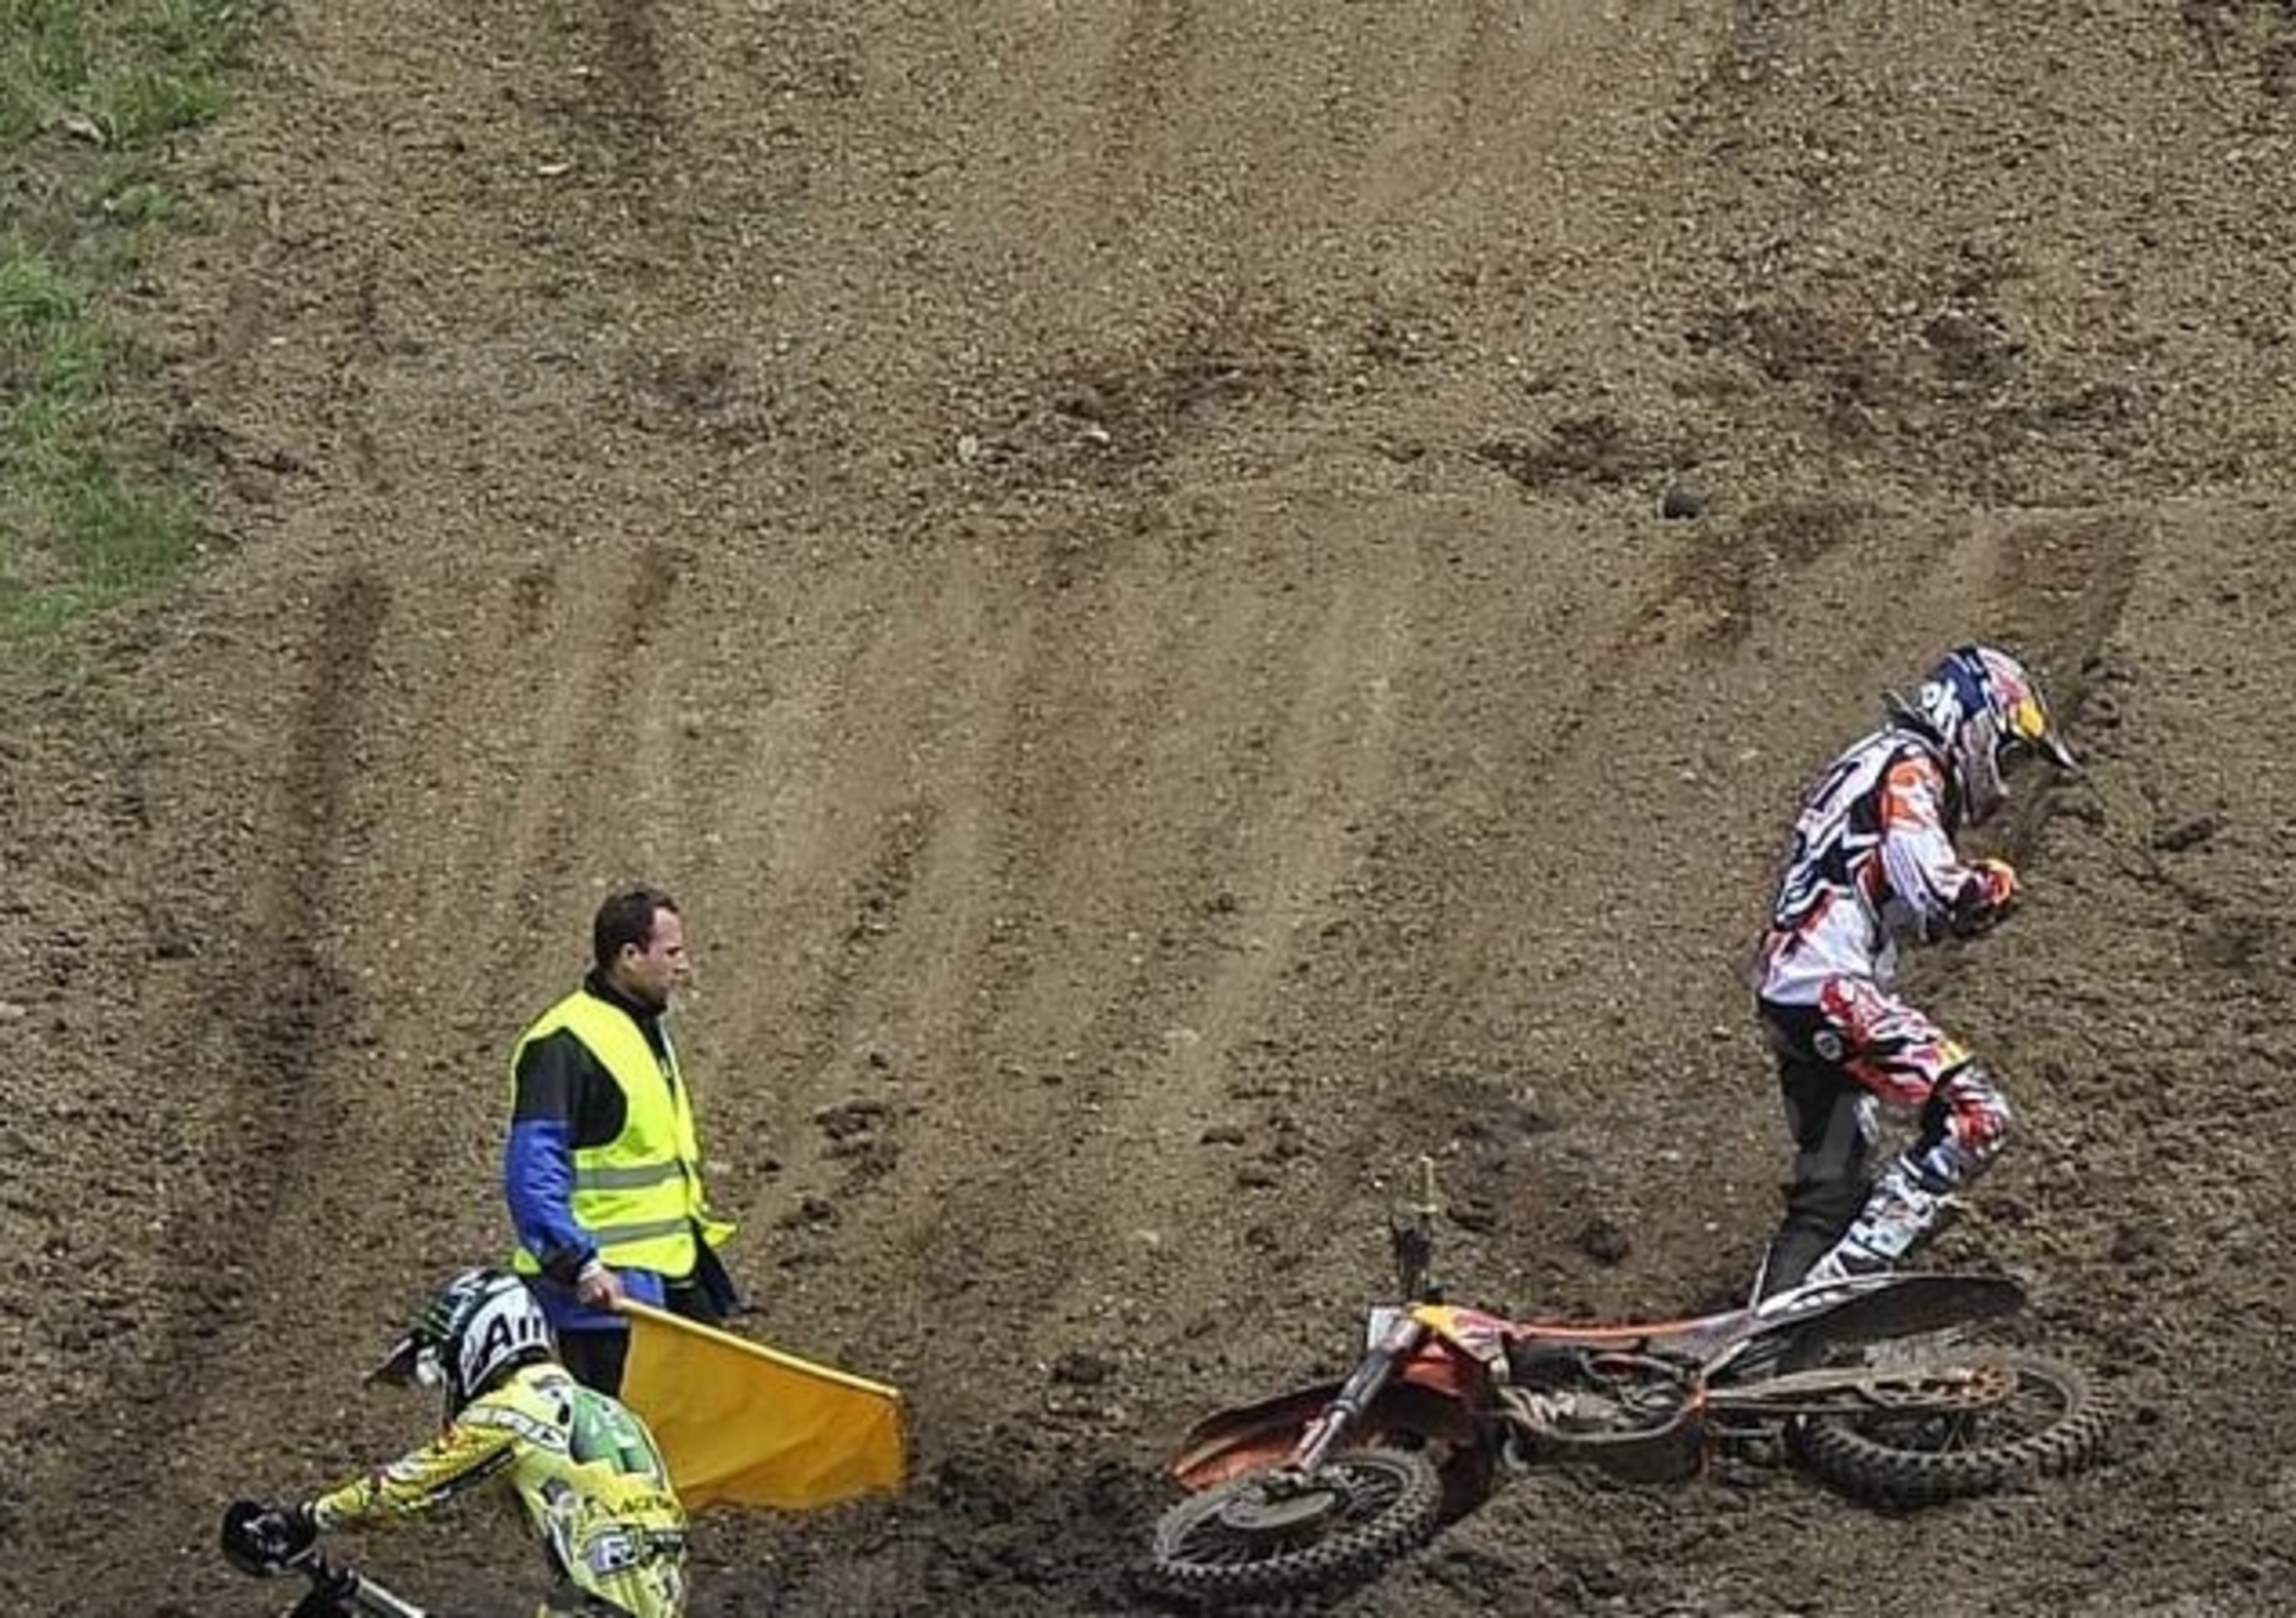 Herlings out sino a fine stagione